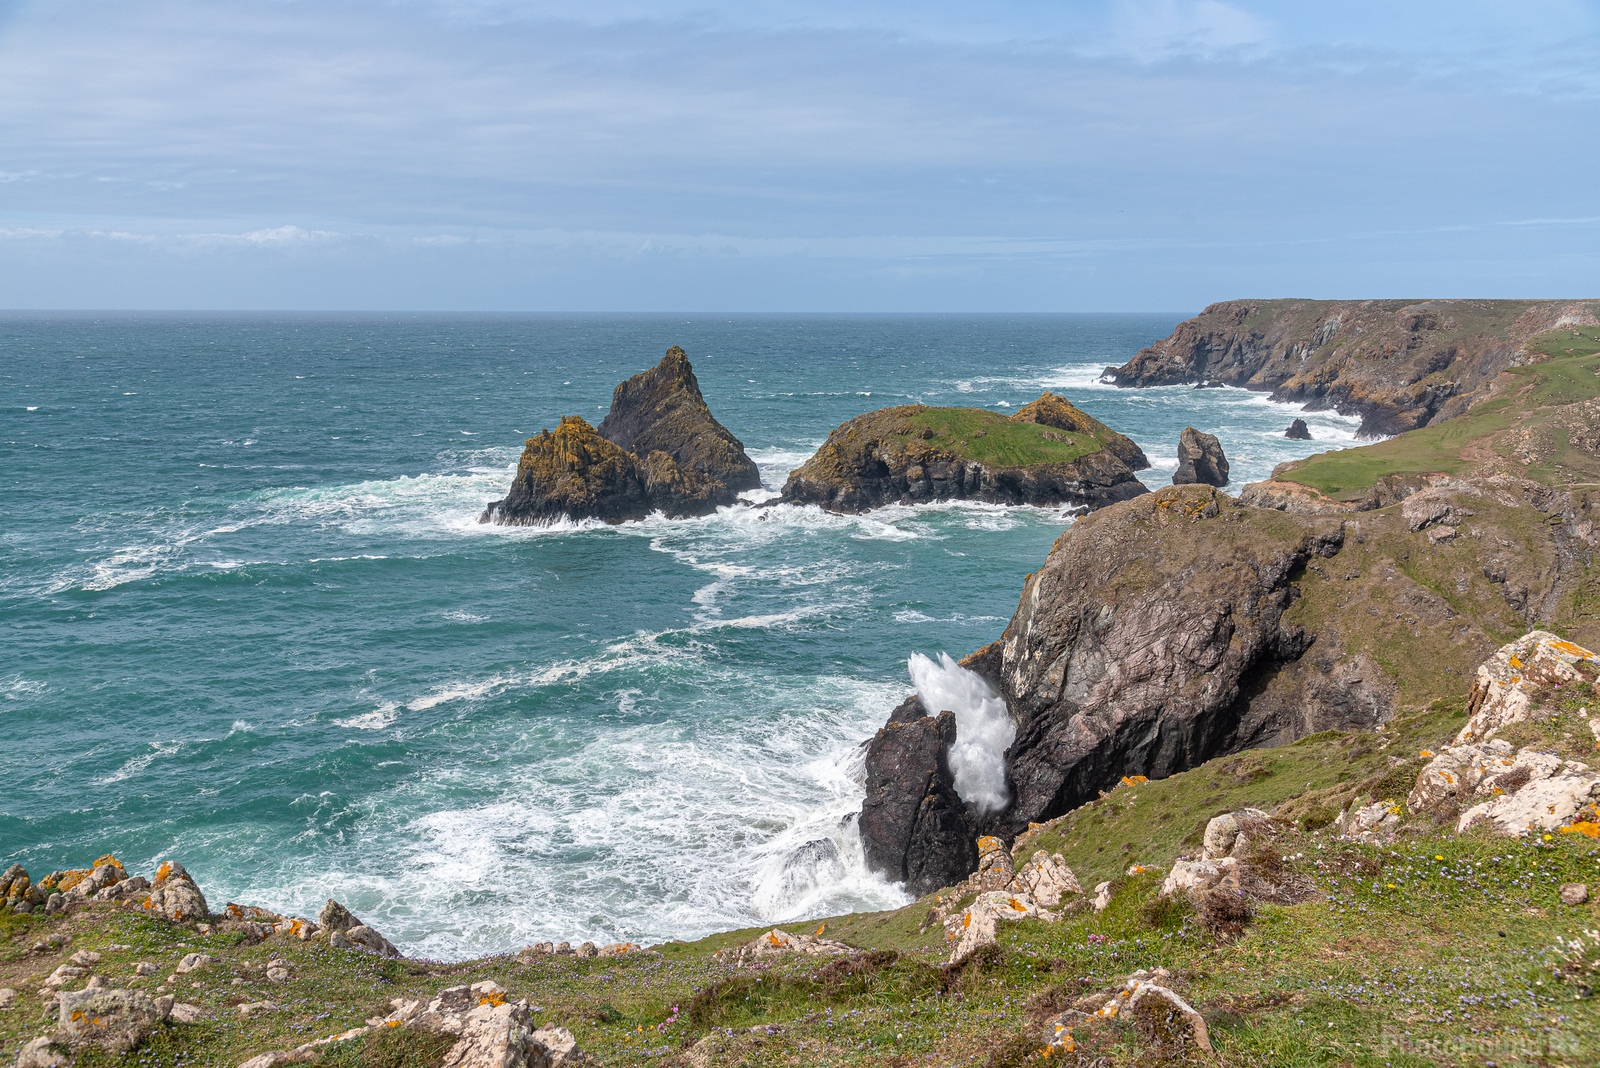 Image of Kynance Cove by Martin Stubbings